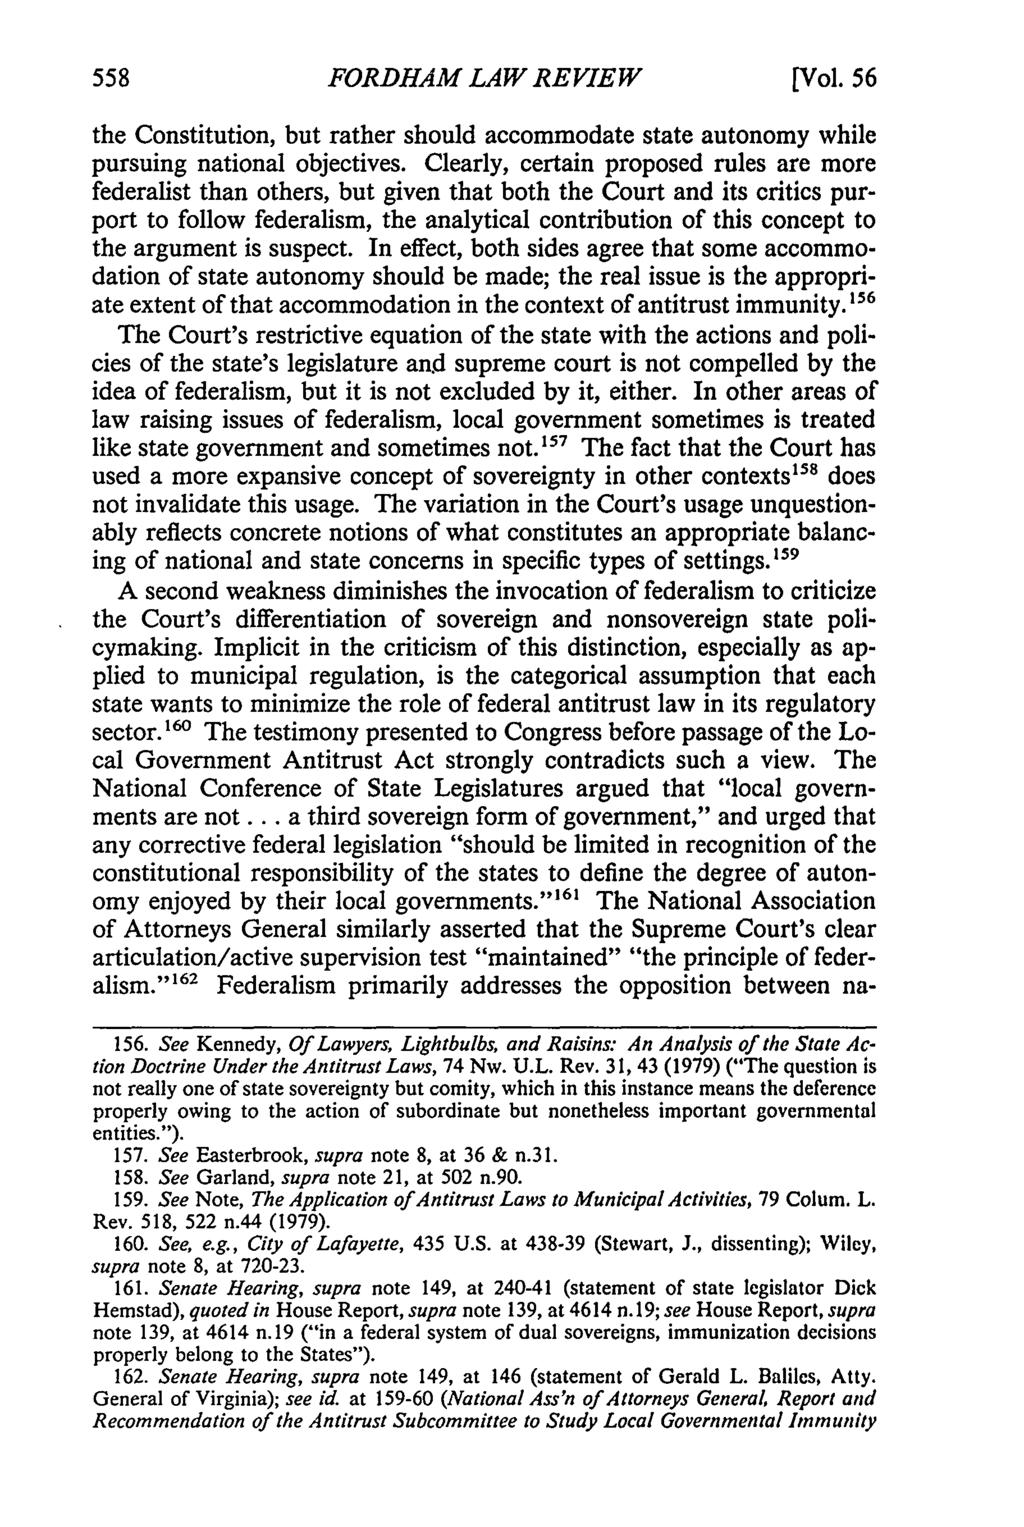 FORDHAM LAW REVIEW [Vol. 56 the Constitution, but rather should accommodate state autonomy while pursuing national objectives.